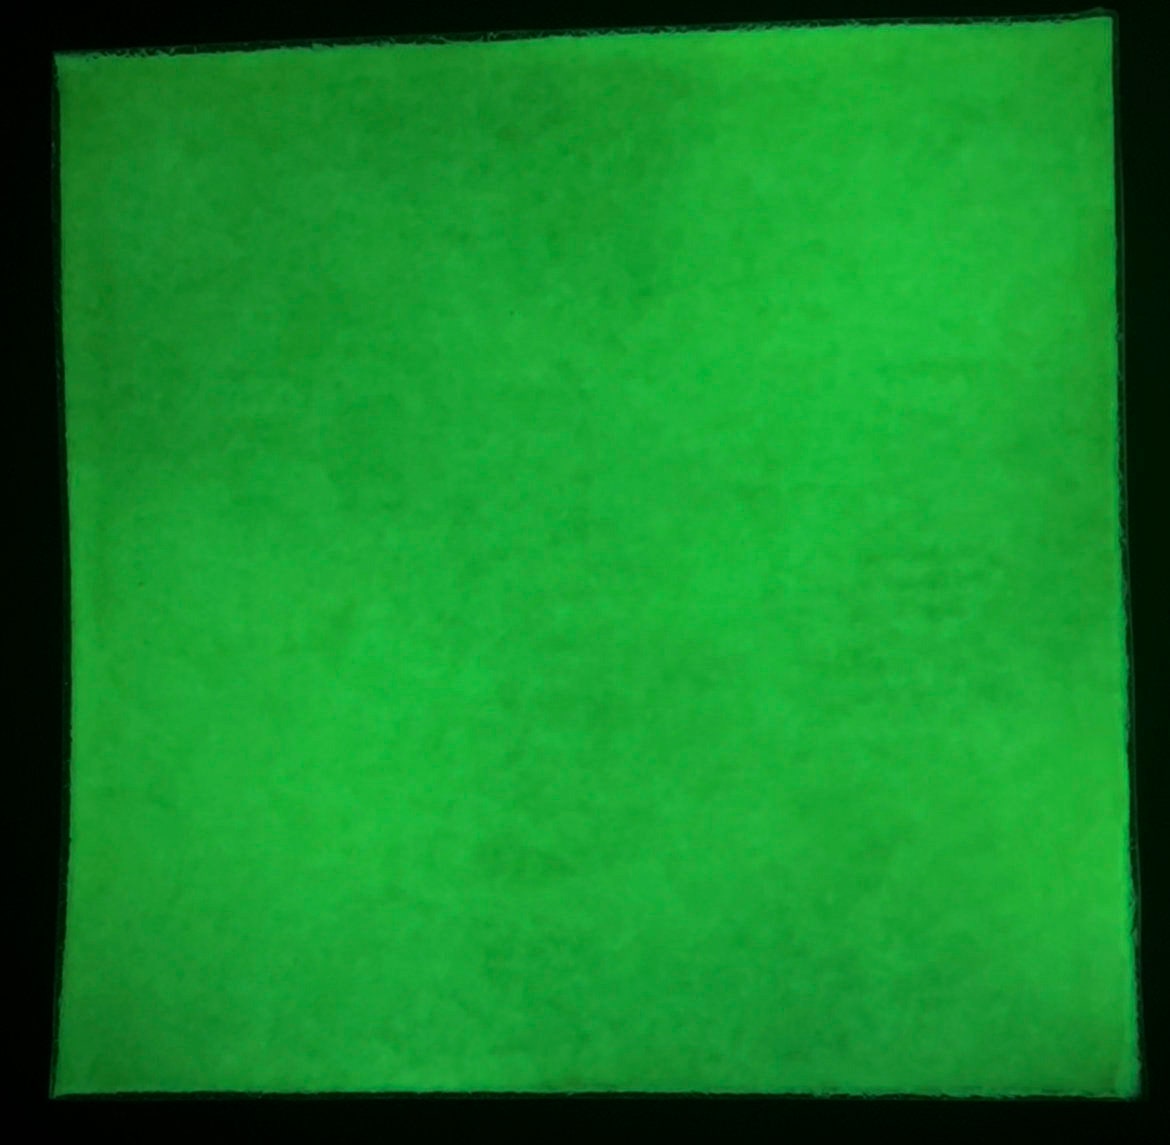 COE 90  / Green  Glow in the Dark sheet glass/ Yellow during the day, green glow at night/ Summer Glow